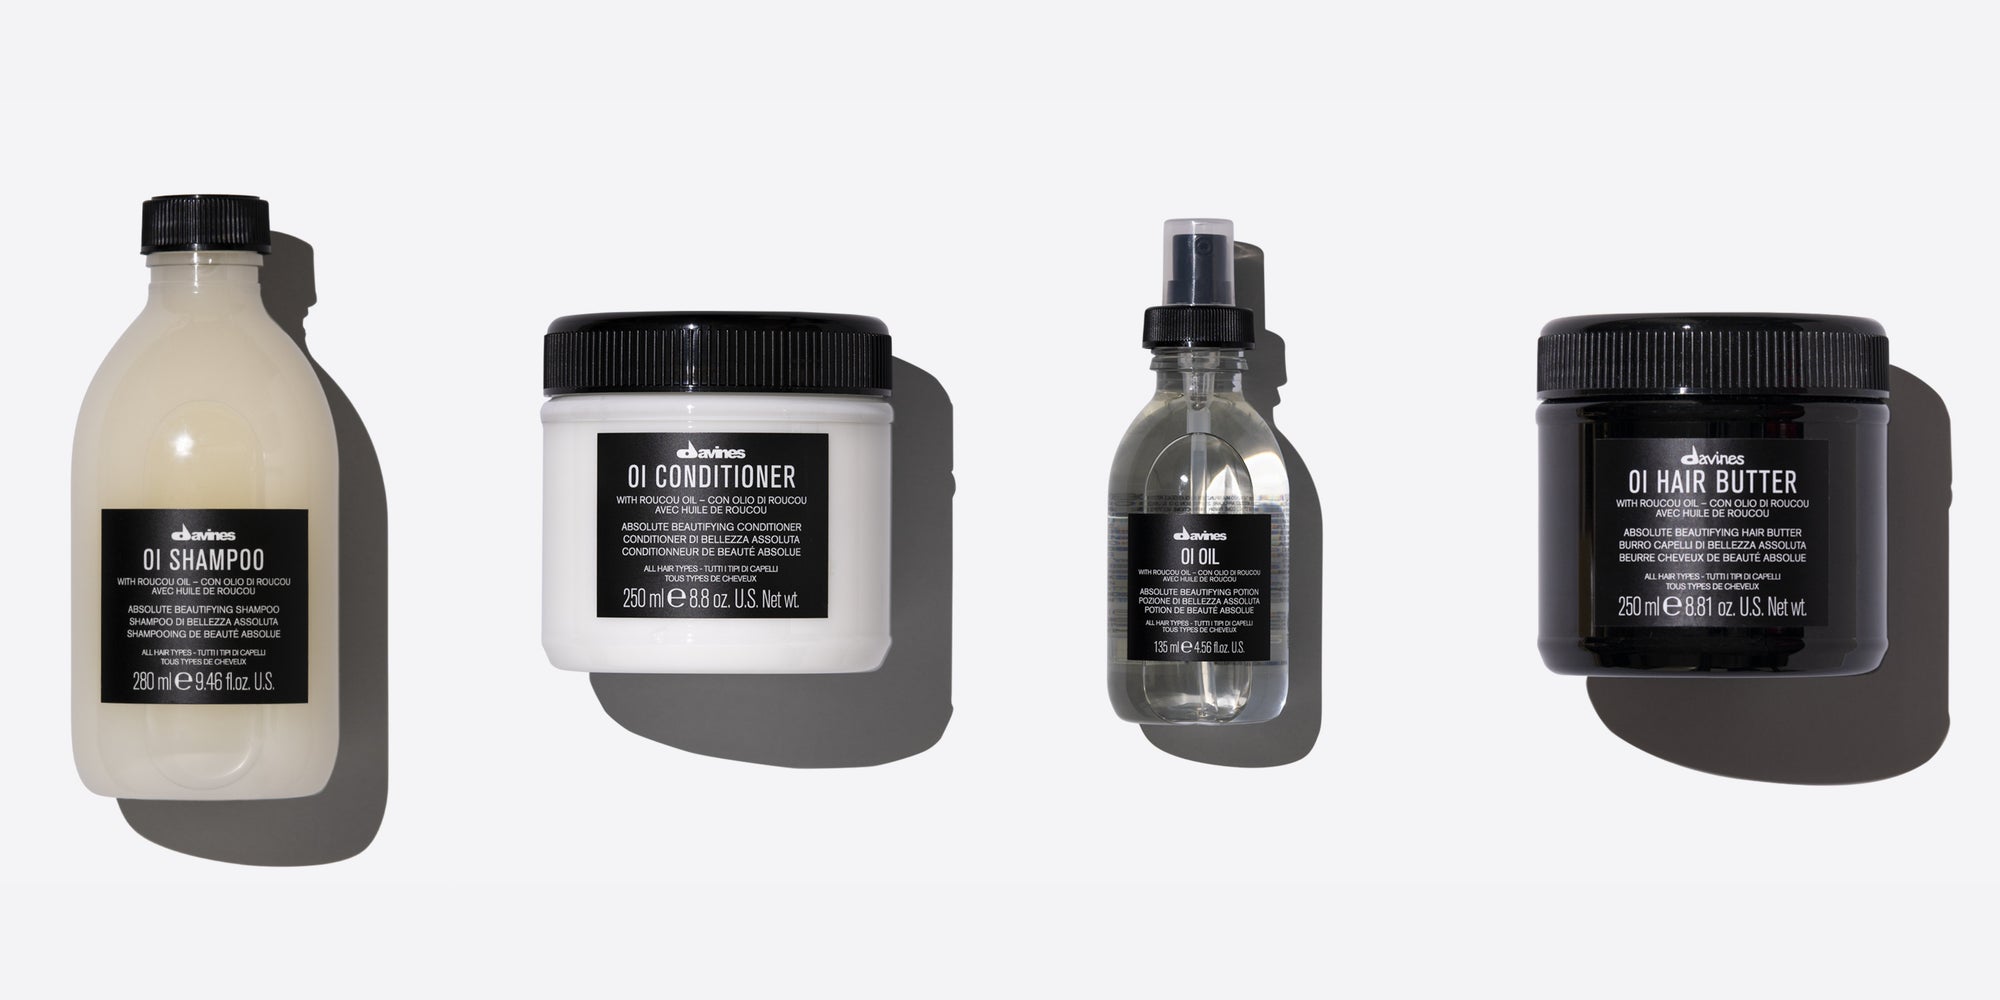 Oi Styling Set For Thick Hair 1  4 pz.Davines
